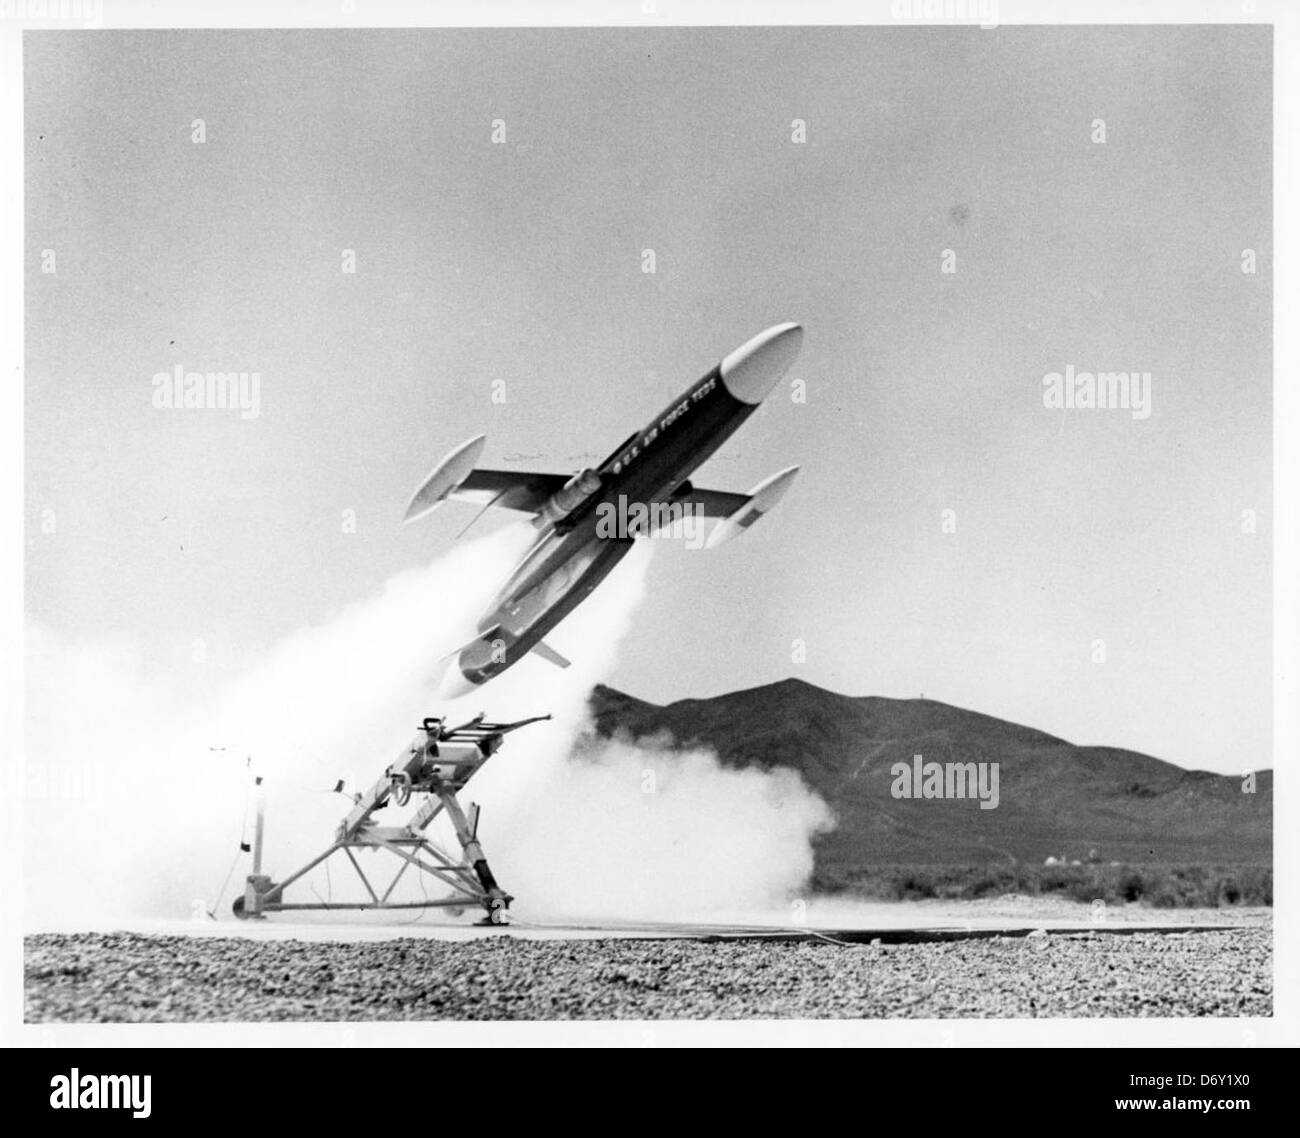 7453-66-61730 Northrop Ventura NV-130 Tactical Expendable Drone System -  TEDS - photo scan Stock Photo - Alamy